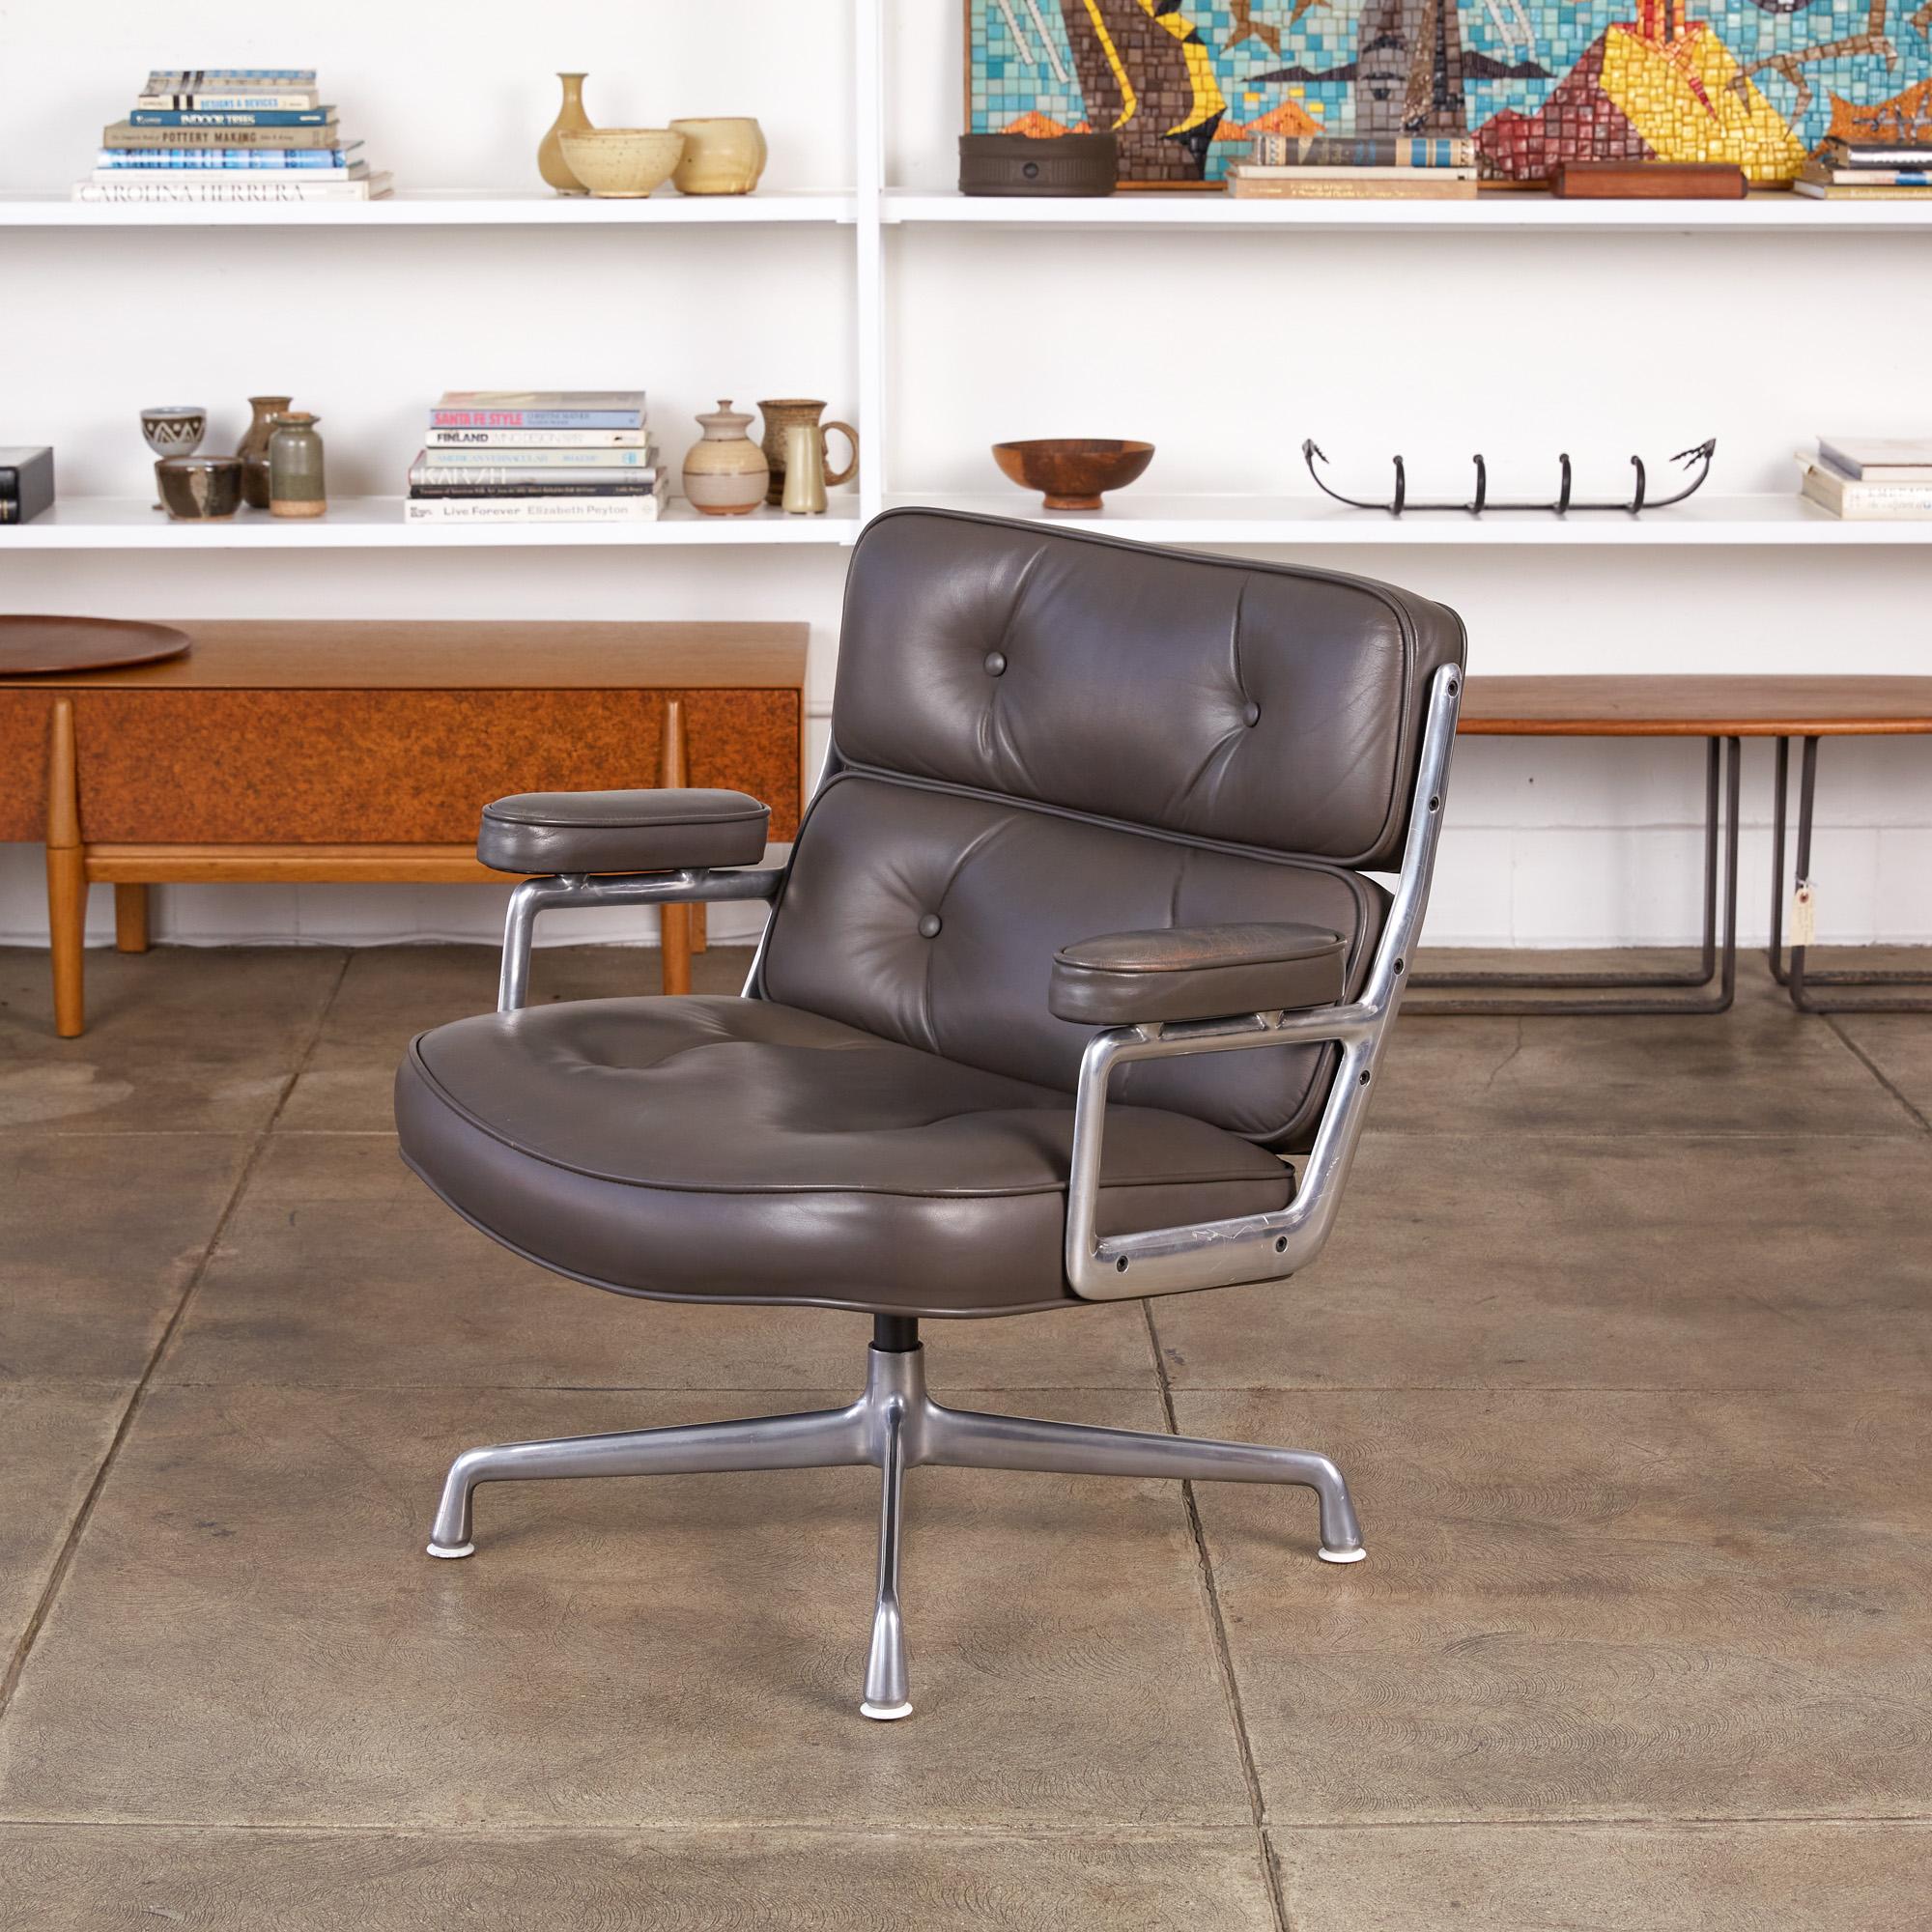 American Eames Time Life Lobby Chair for Herman Miller